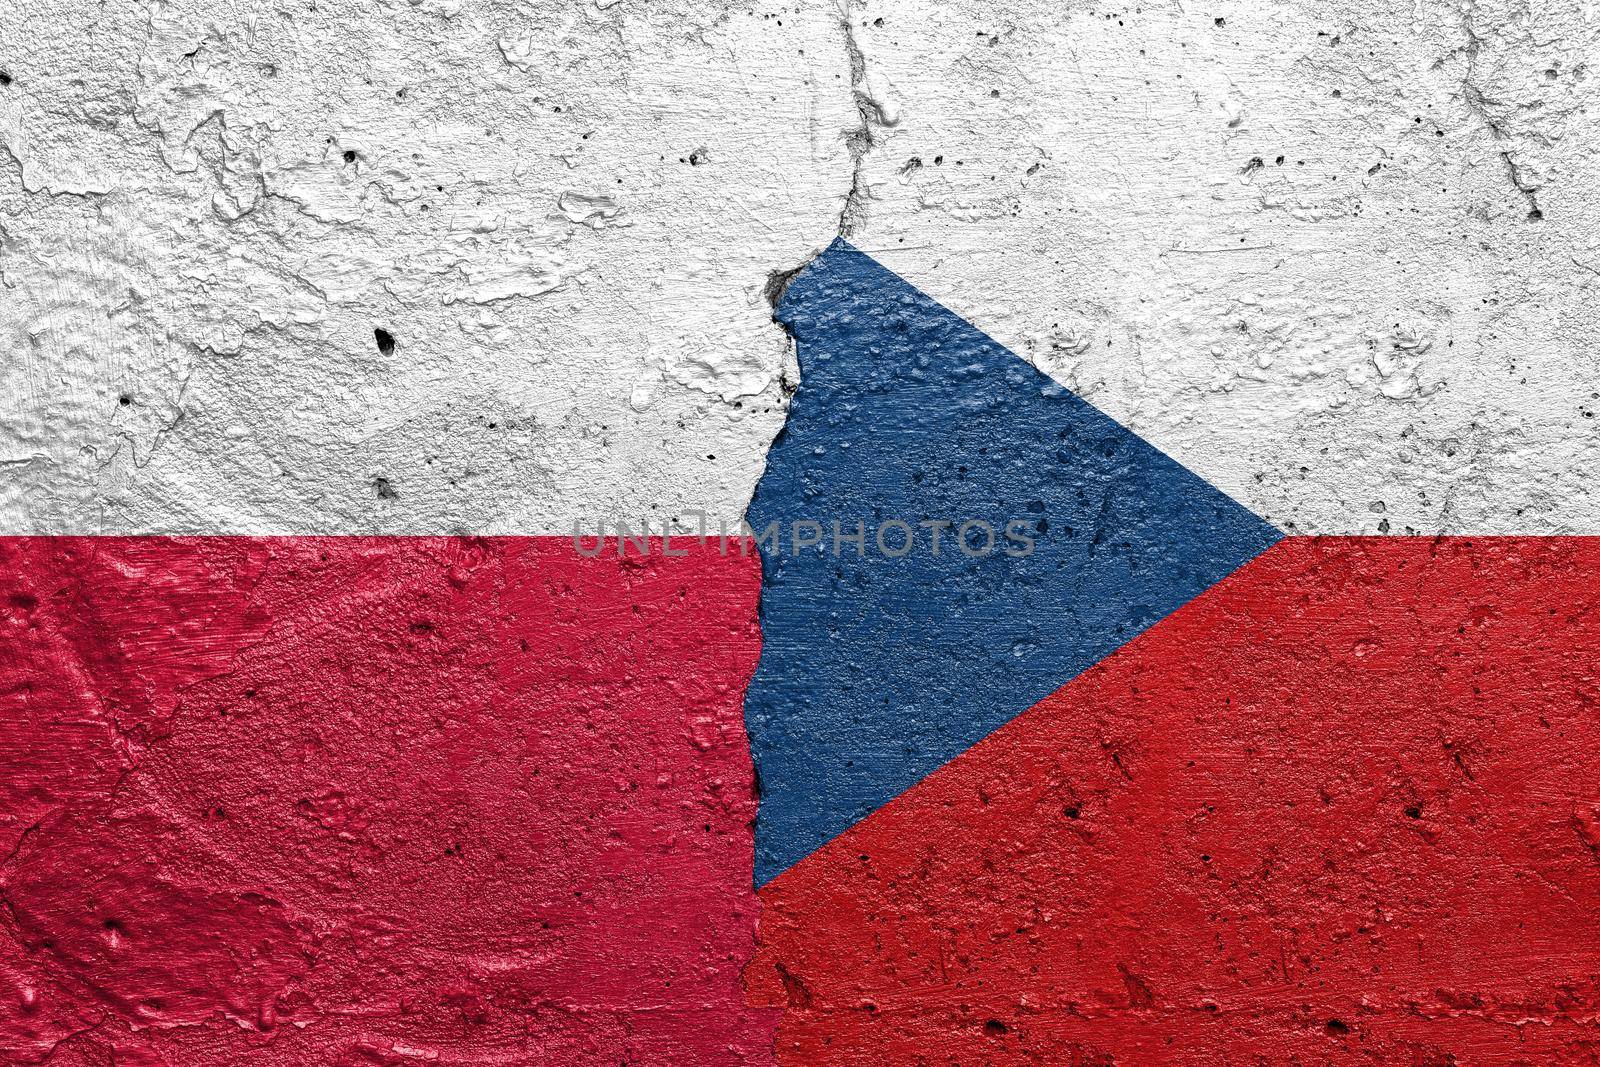 Poland and Hungary - Cracked concrete wall painted with a Polish flag on the left and a Hungary flag on the right